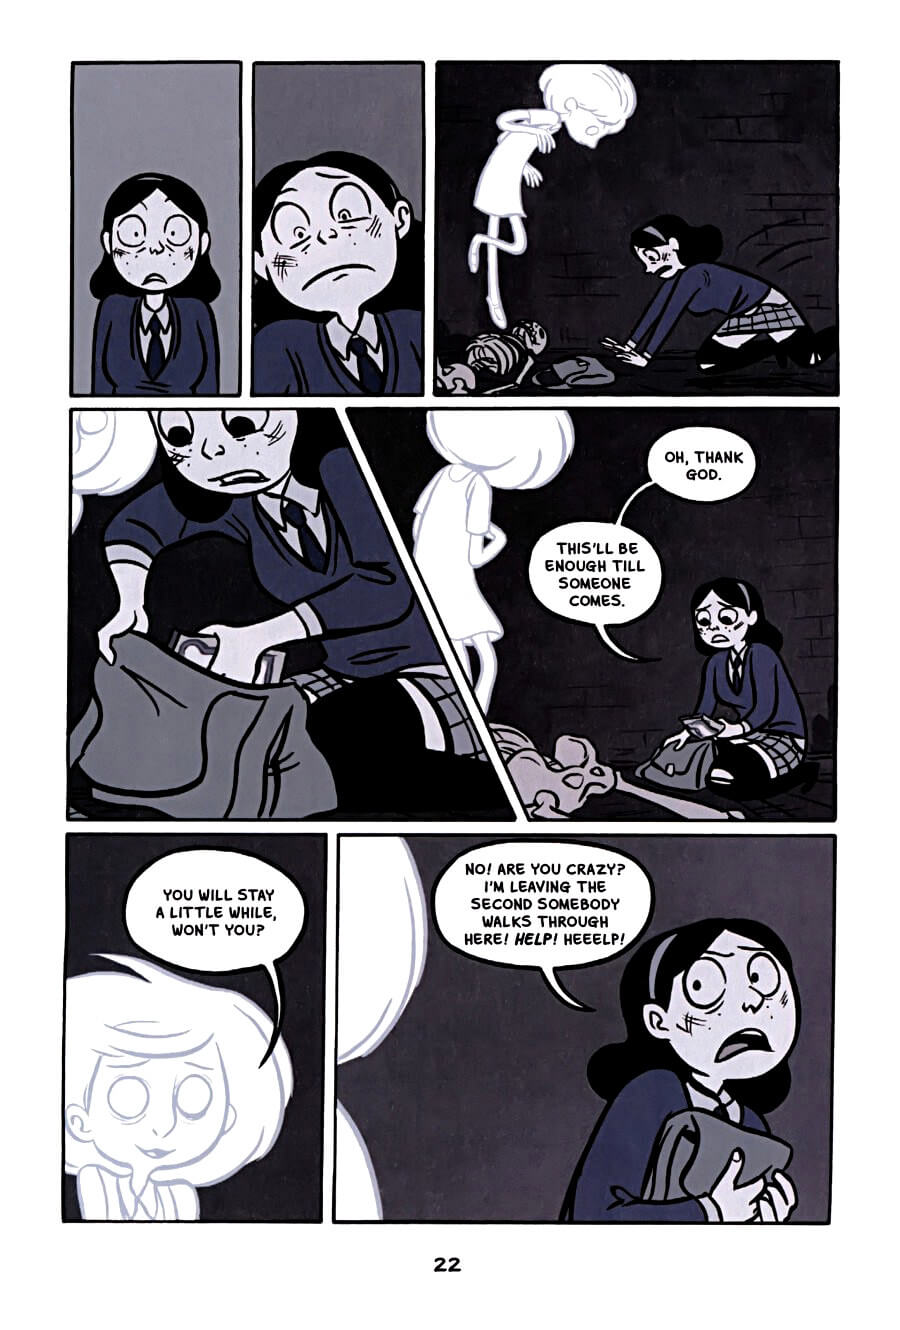 page 22 of anya's ghost graphic novel